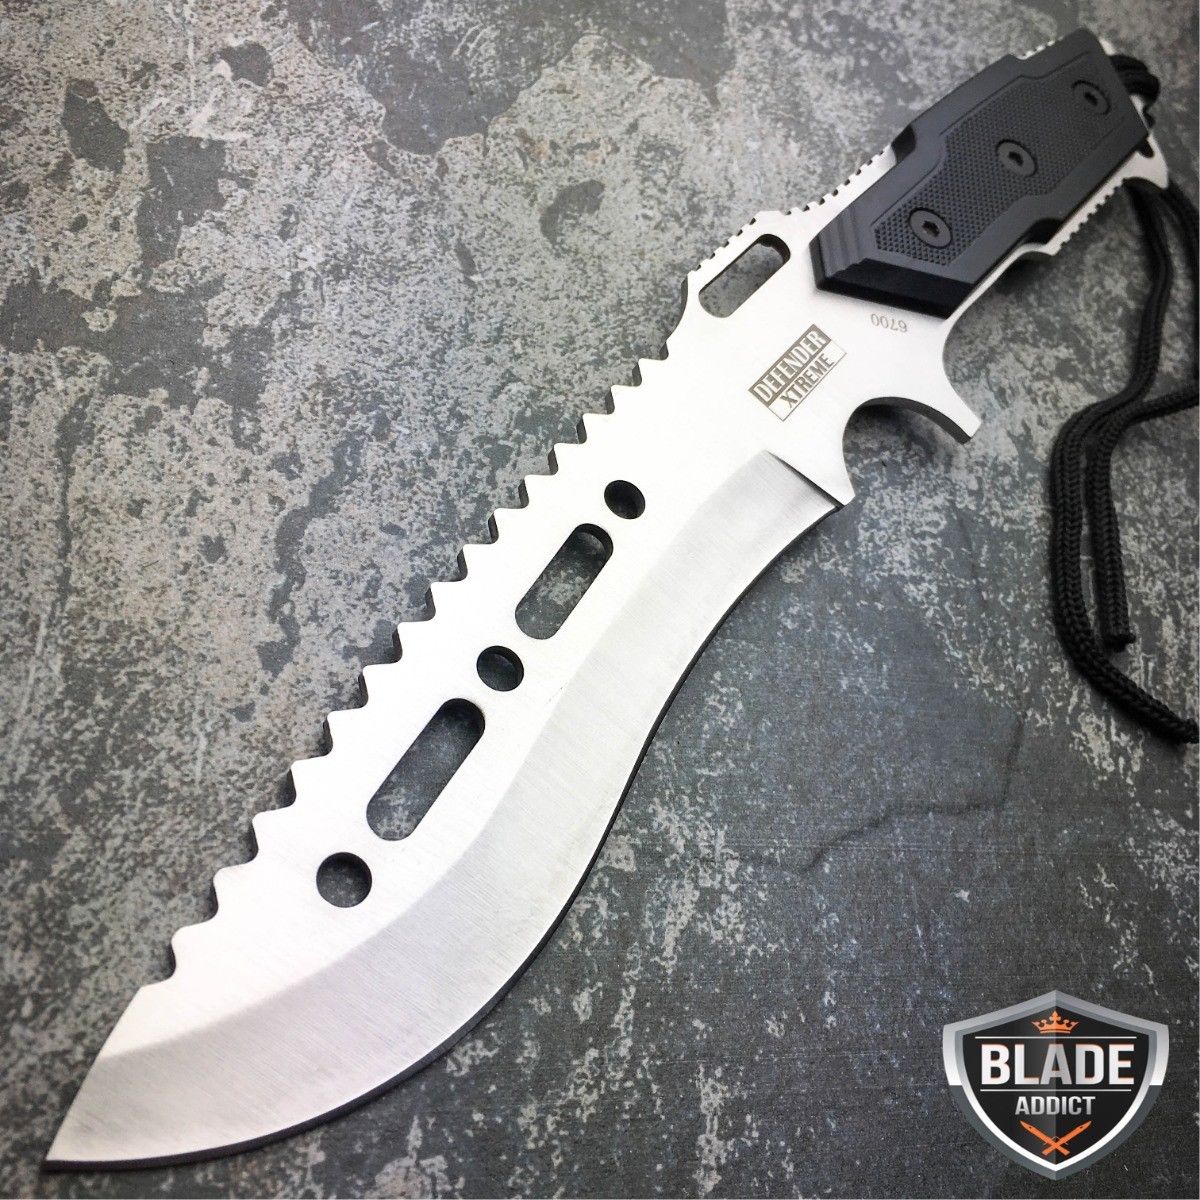 12" SILVER Fixed Blade Tactical Combat Hunting Survival Knife w/ Sheath Bowie Outdoor